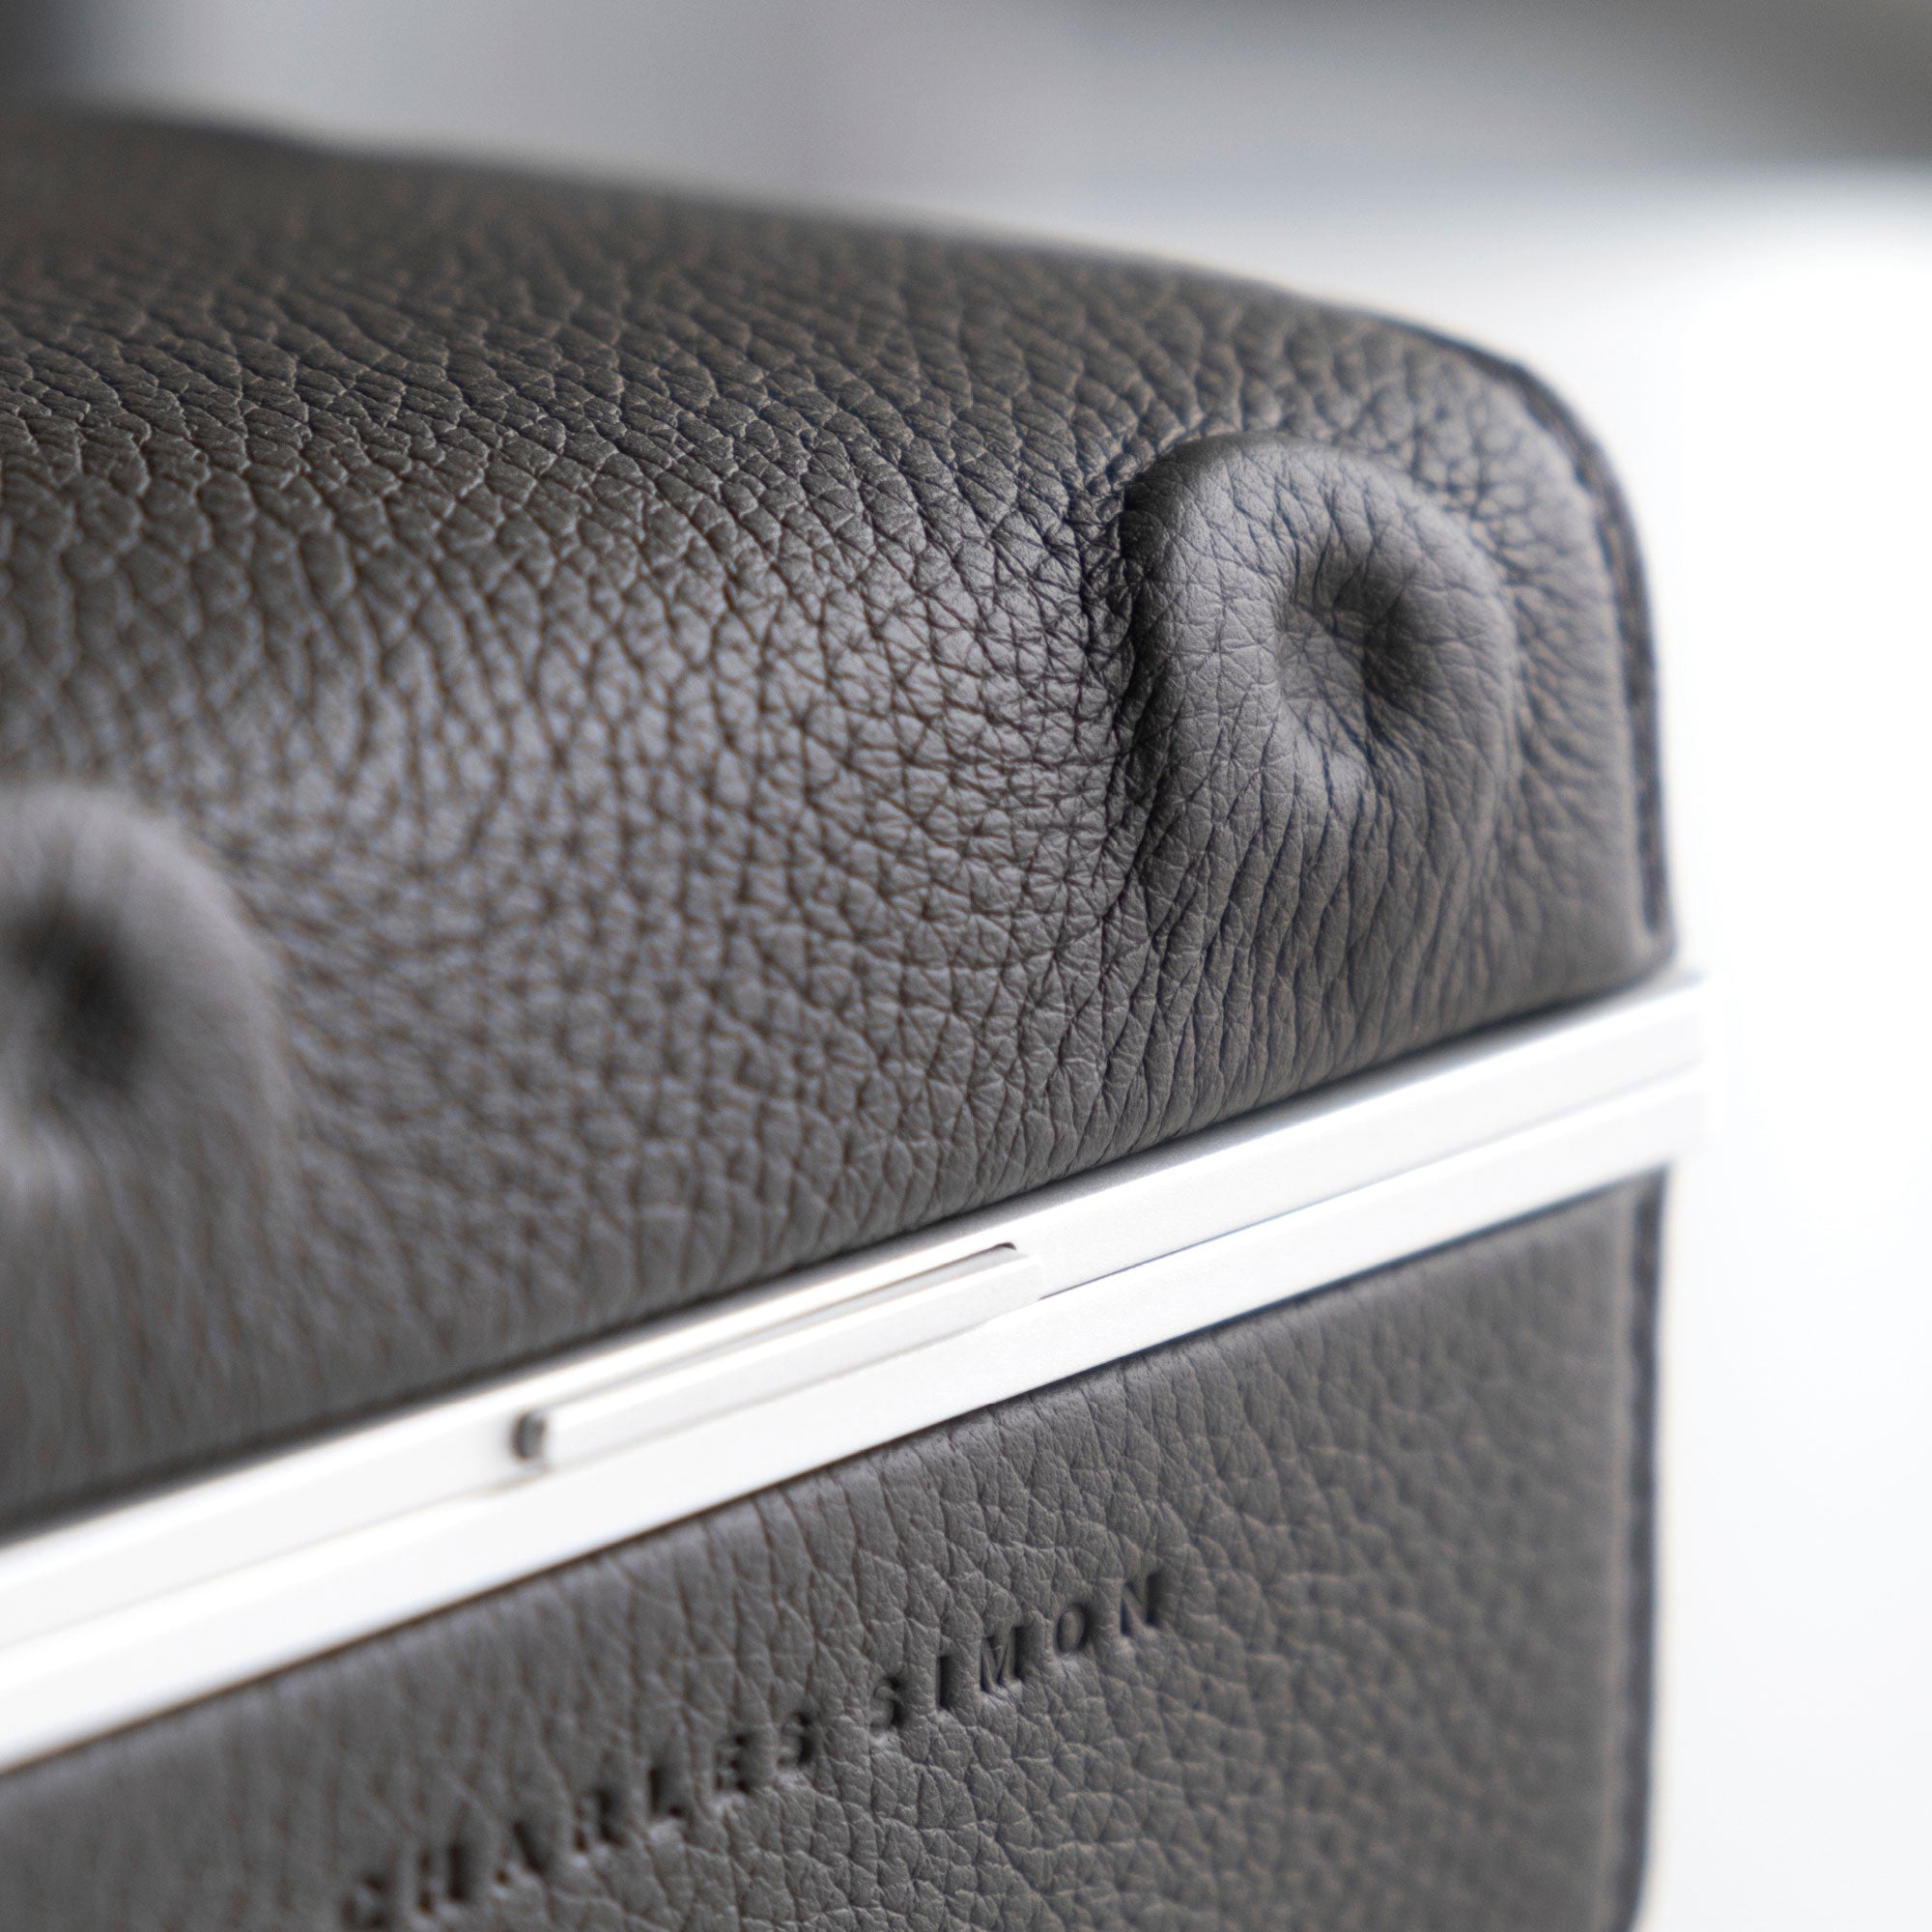 Detail photo of the nostril of the Hippo watch case by Charles Simon. Handmade in Canada from premium leather and anodized aluminum.